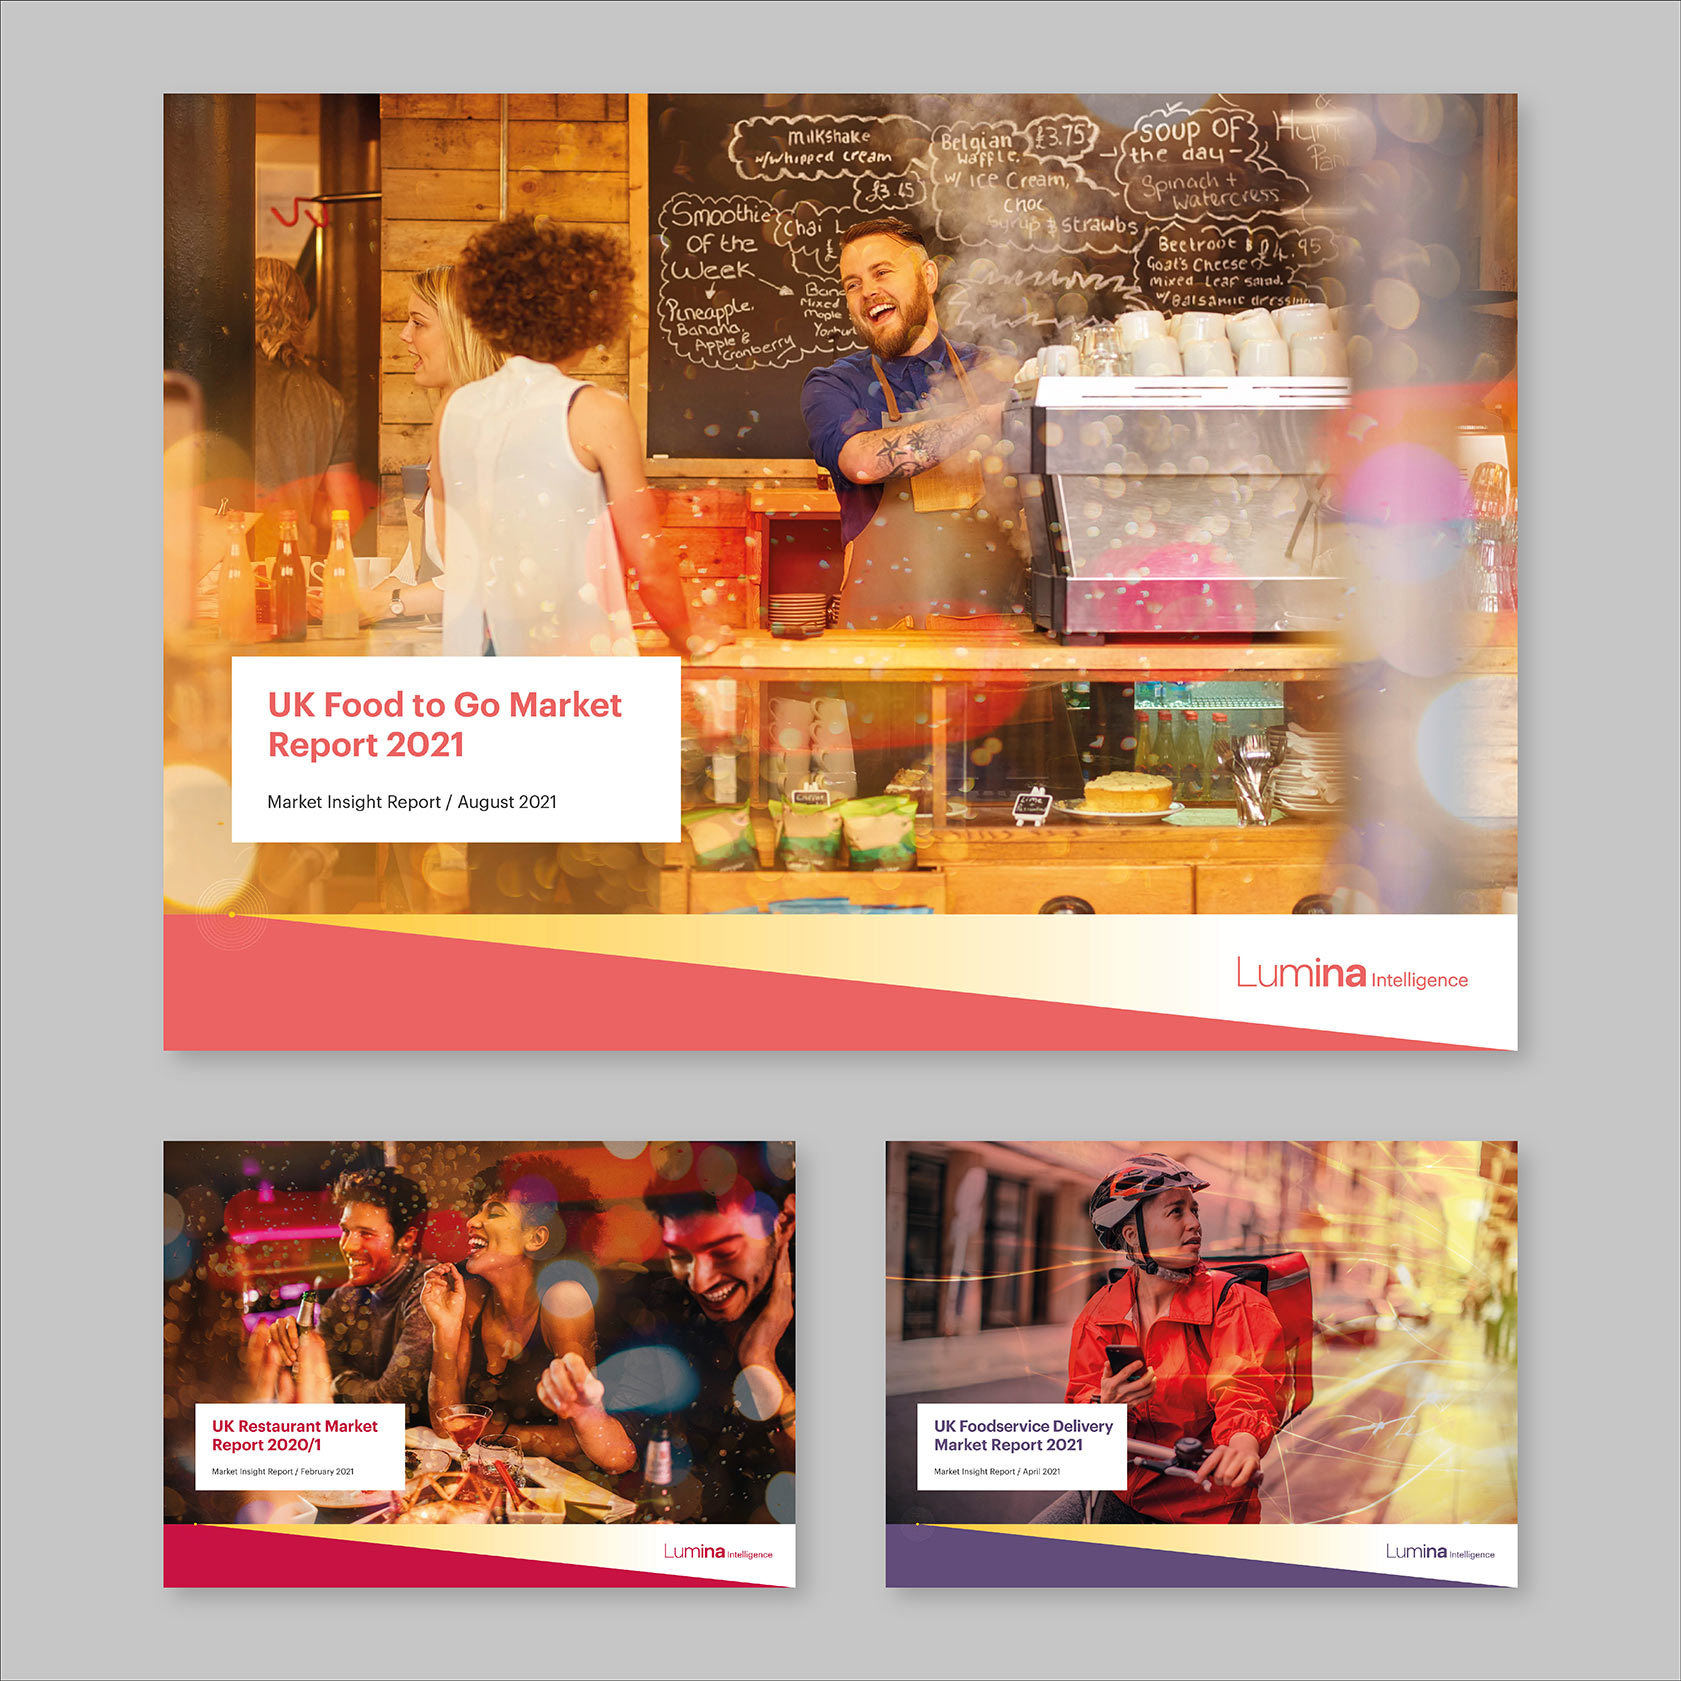 Branded insight report templates featuring images treated with warm, ambient lighting effects